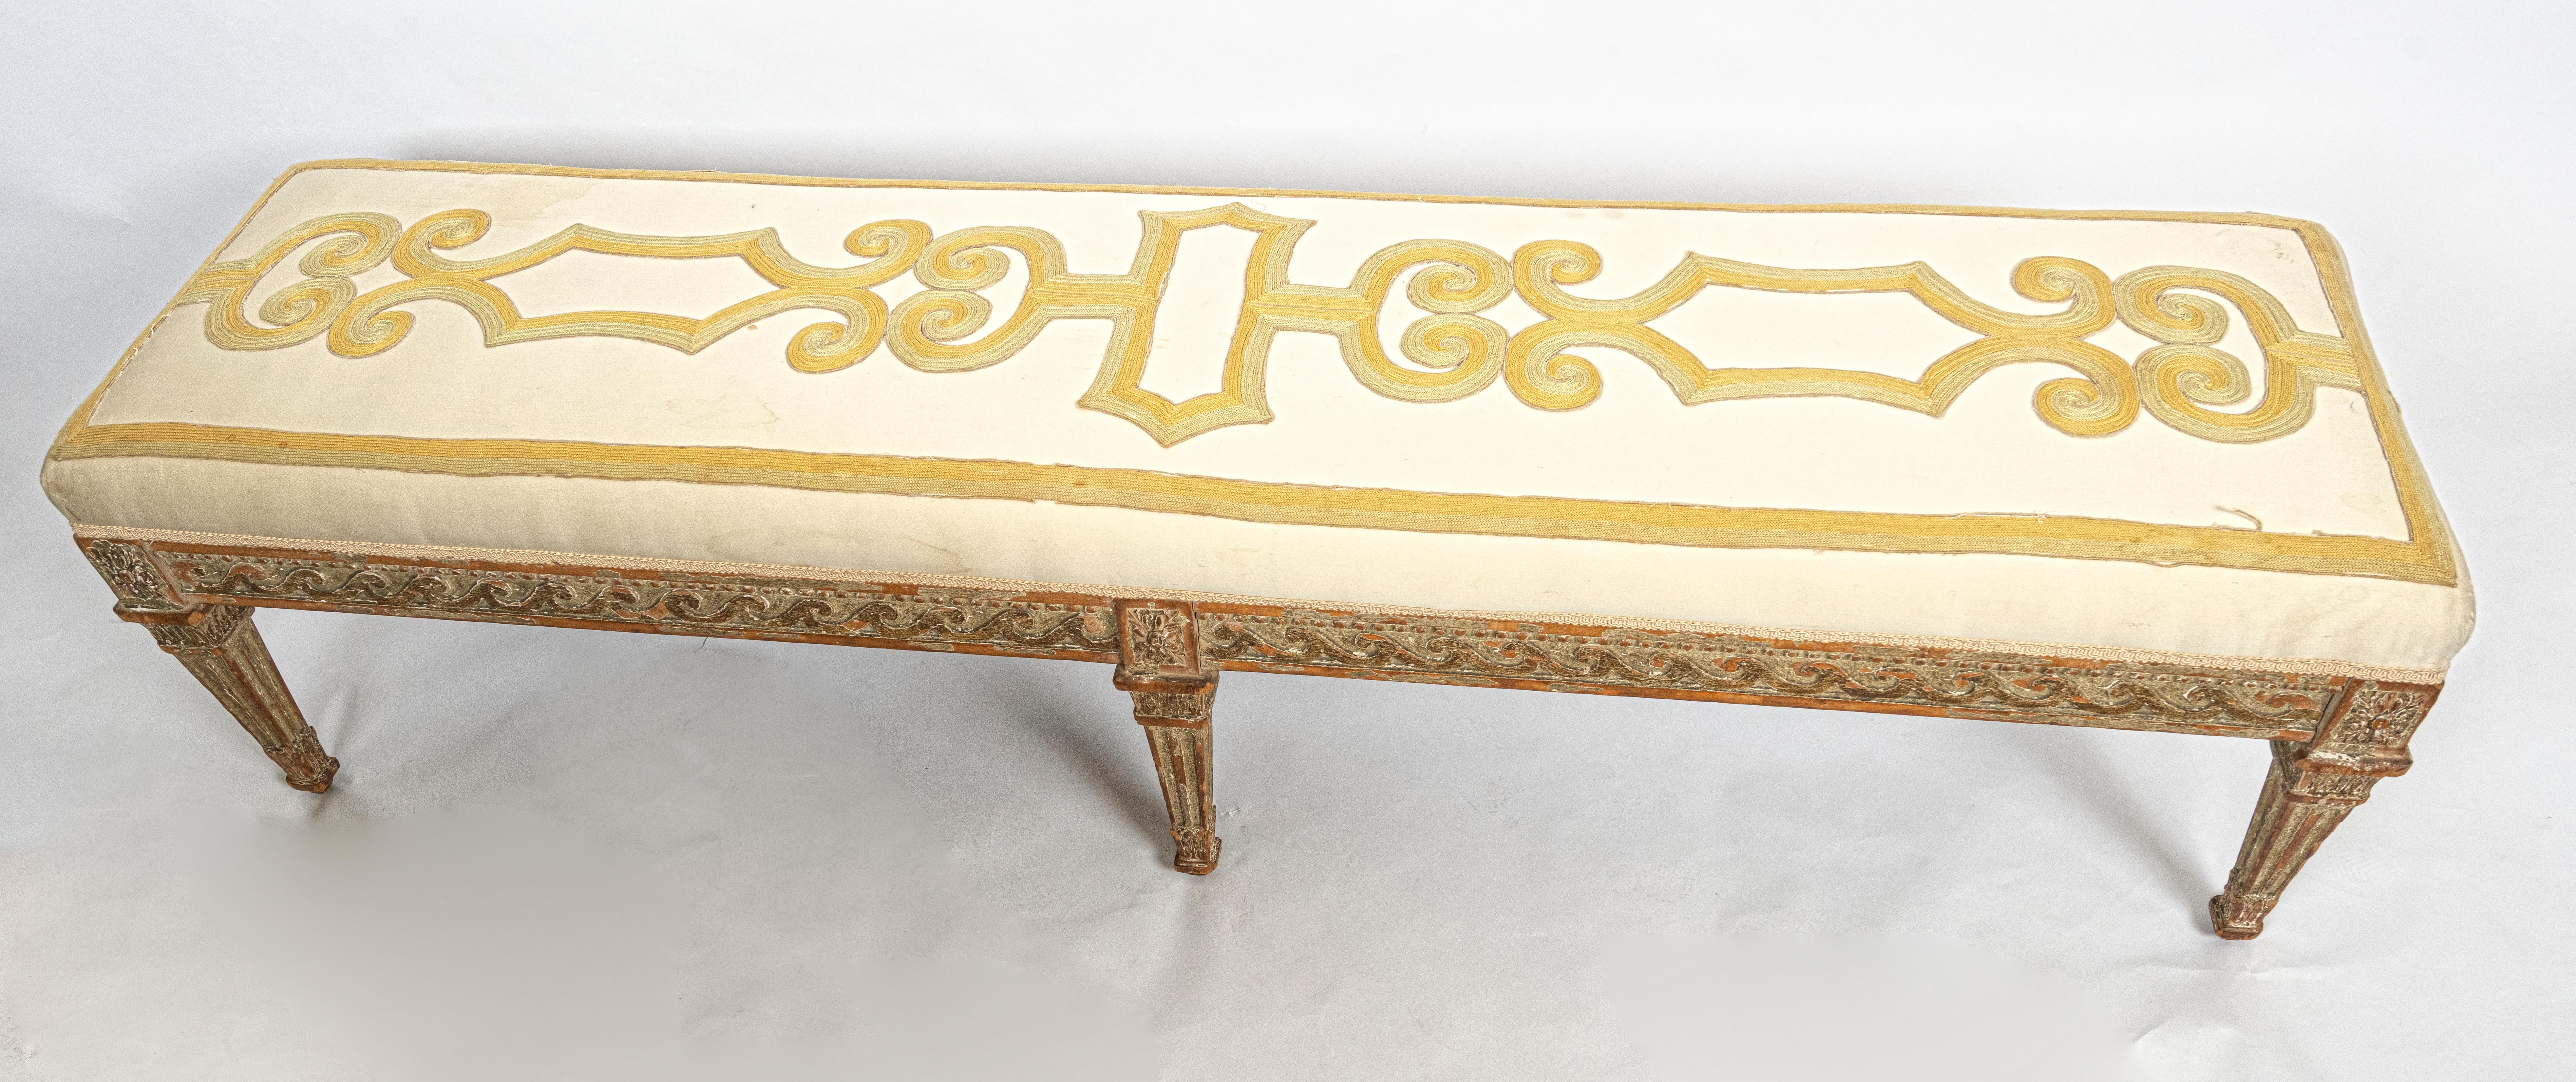 An Italian Neoclassical-design bench with six square and tapered fluted legs, each with a carved Corinthian capital motif. Supported by an apron with carved wood, having a vitruvian scroll motif frieze. The upholstered seat with ribbon applique,